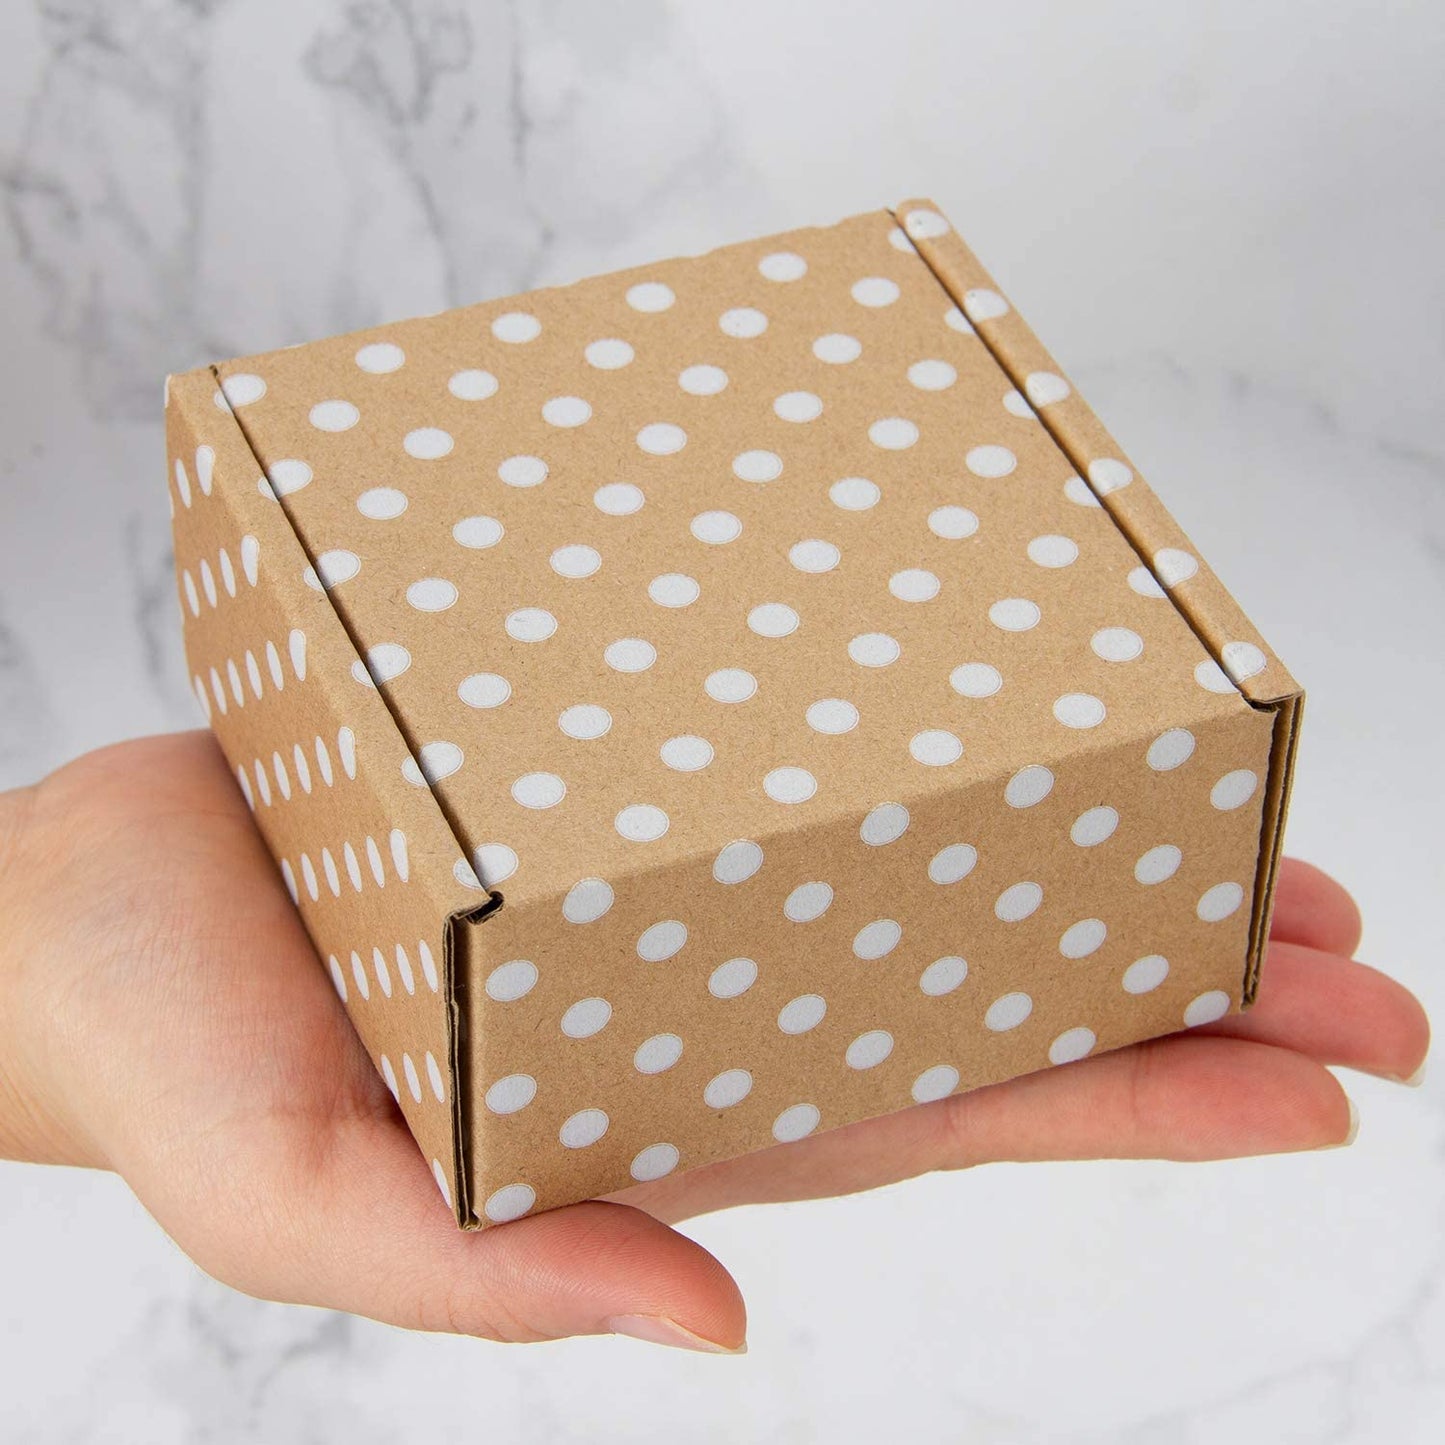 WRAPLA Recyclable Corrugated Box Mailers -10 X 10 X 5cm - Kraft Cardboard Box White Polka Dot Printed Shipping Small - 25 Pack